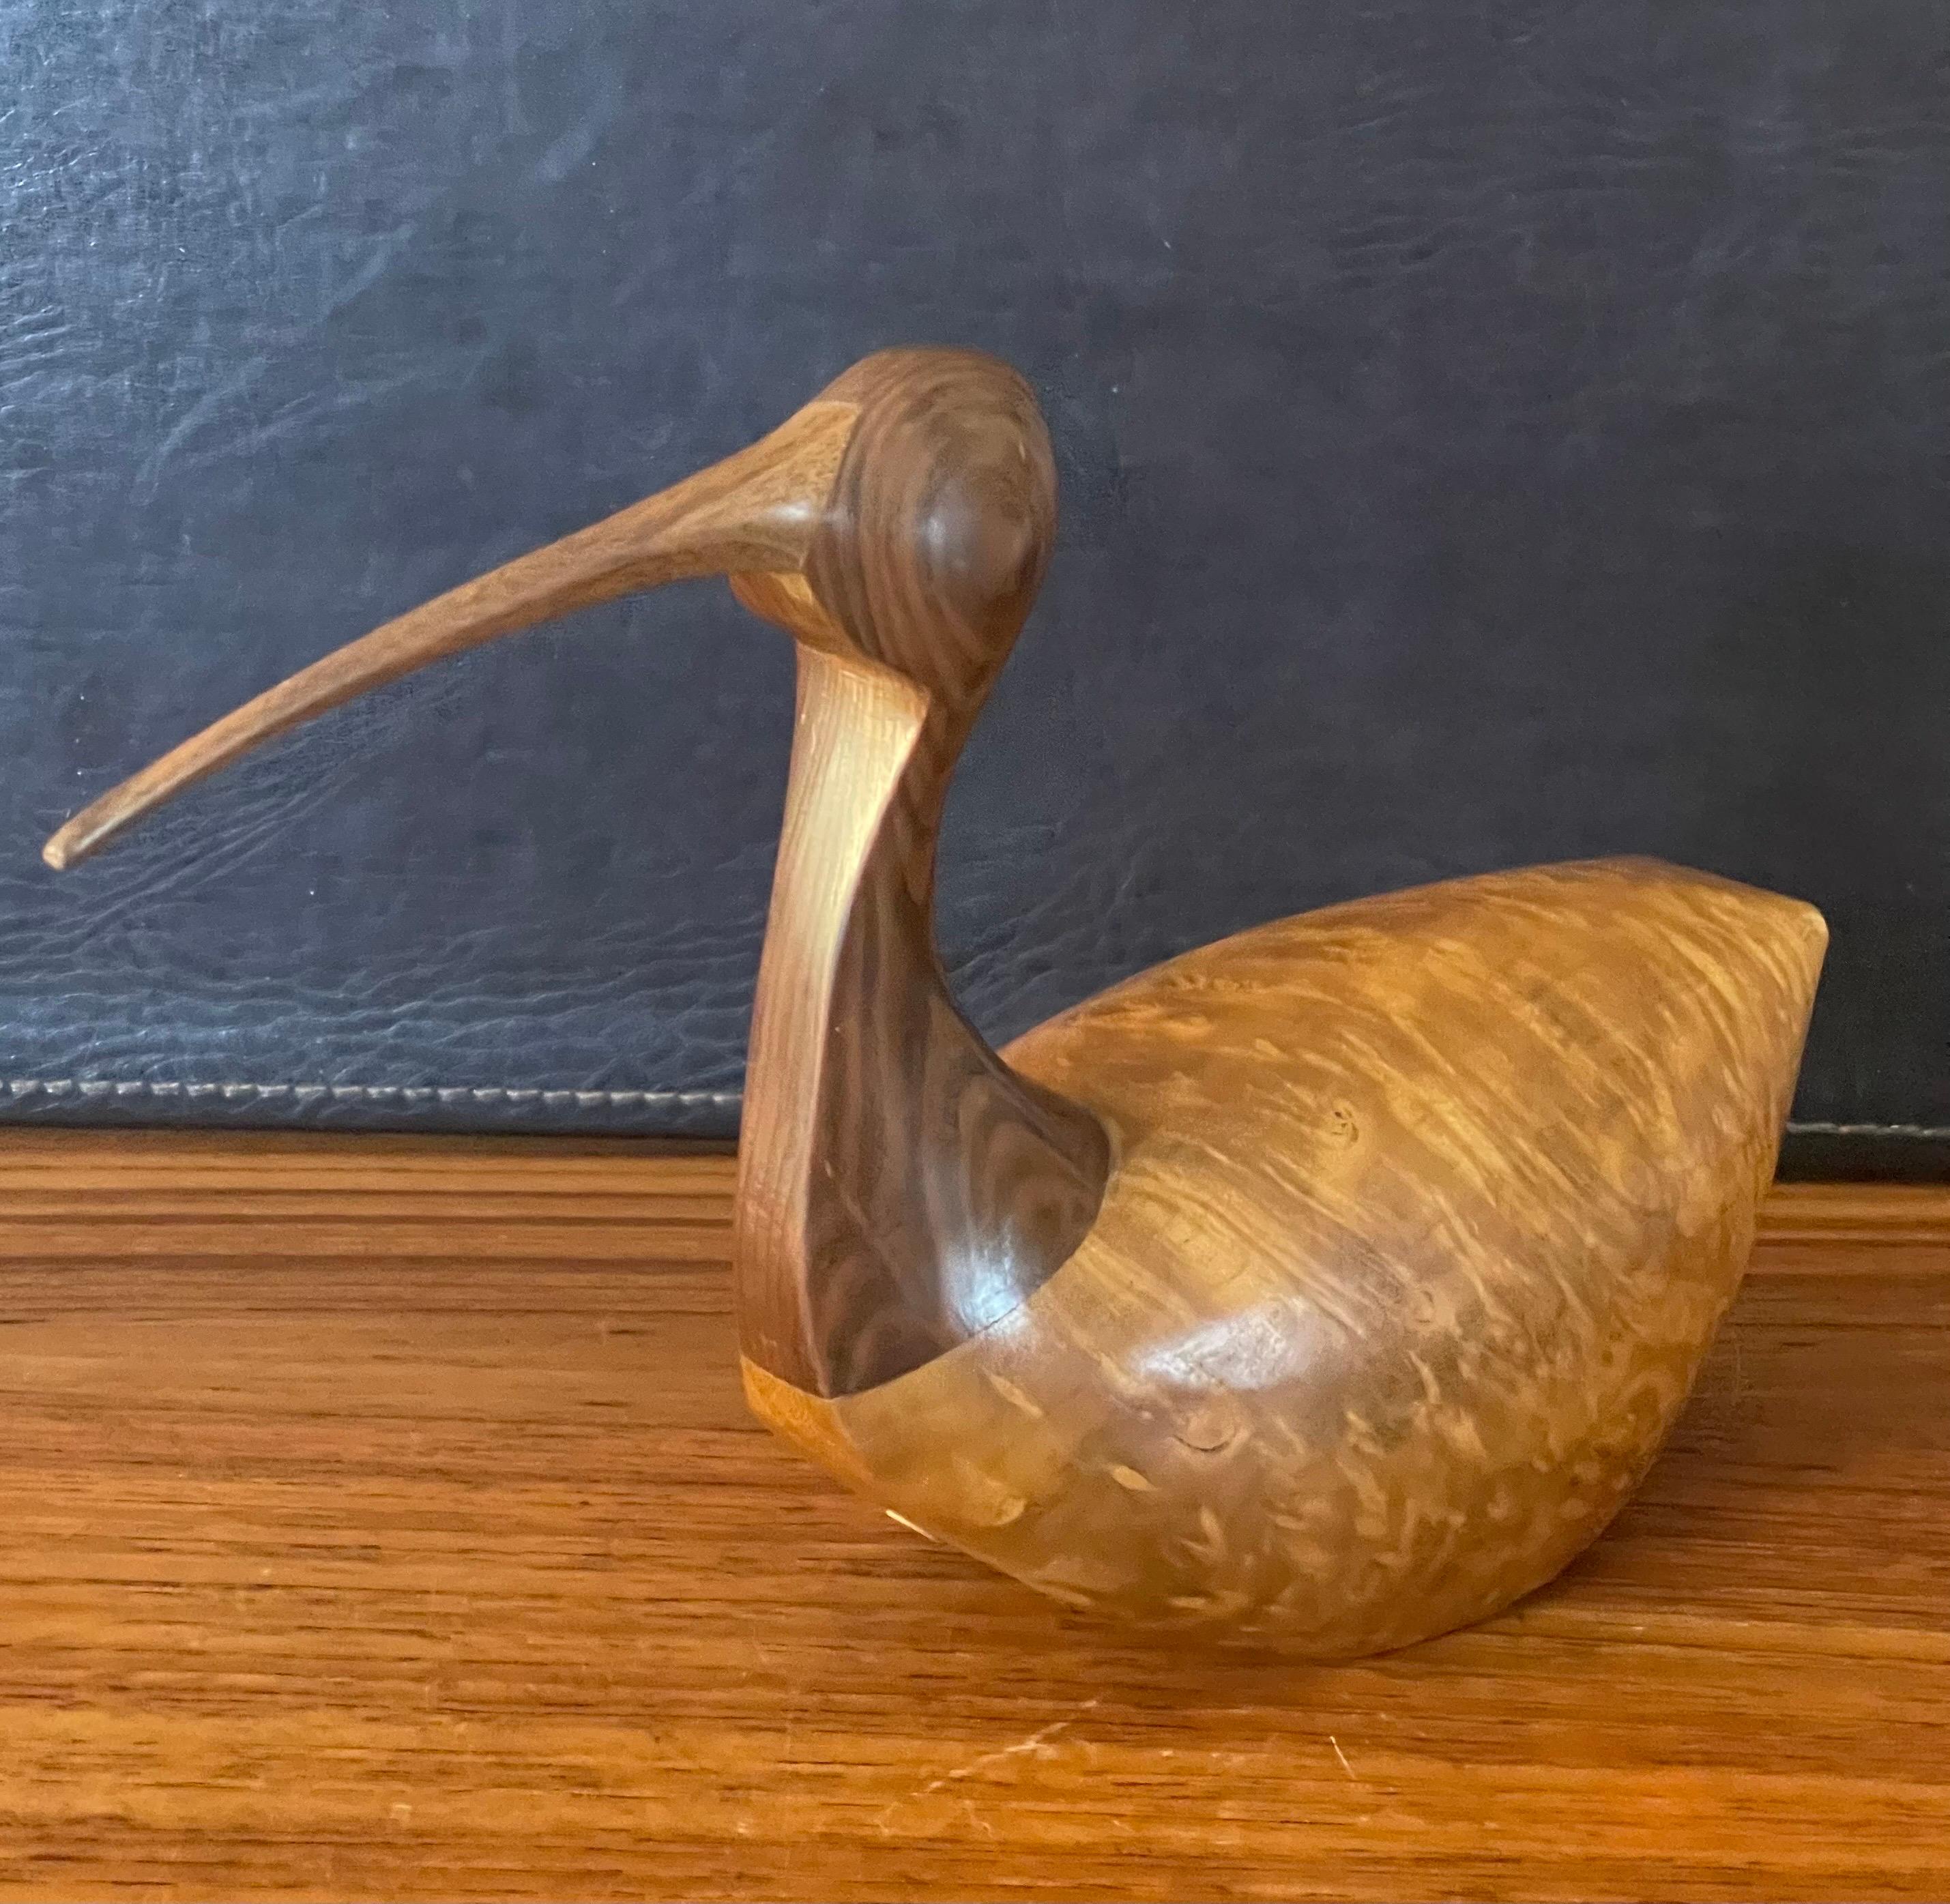 Fabulous hand carved mixed woods shore bird sculpture by Kevin Morin, circa 1990s. The piece is of exceptionally high quality and is made of myrtlewood, redwood and walnut; it is signed on the side. The sculpture is in very good vintage condition